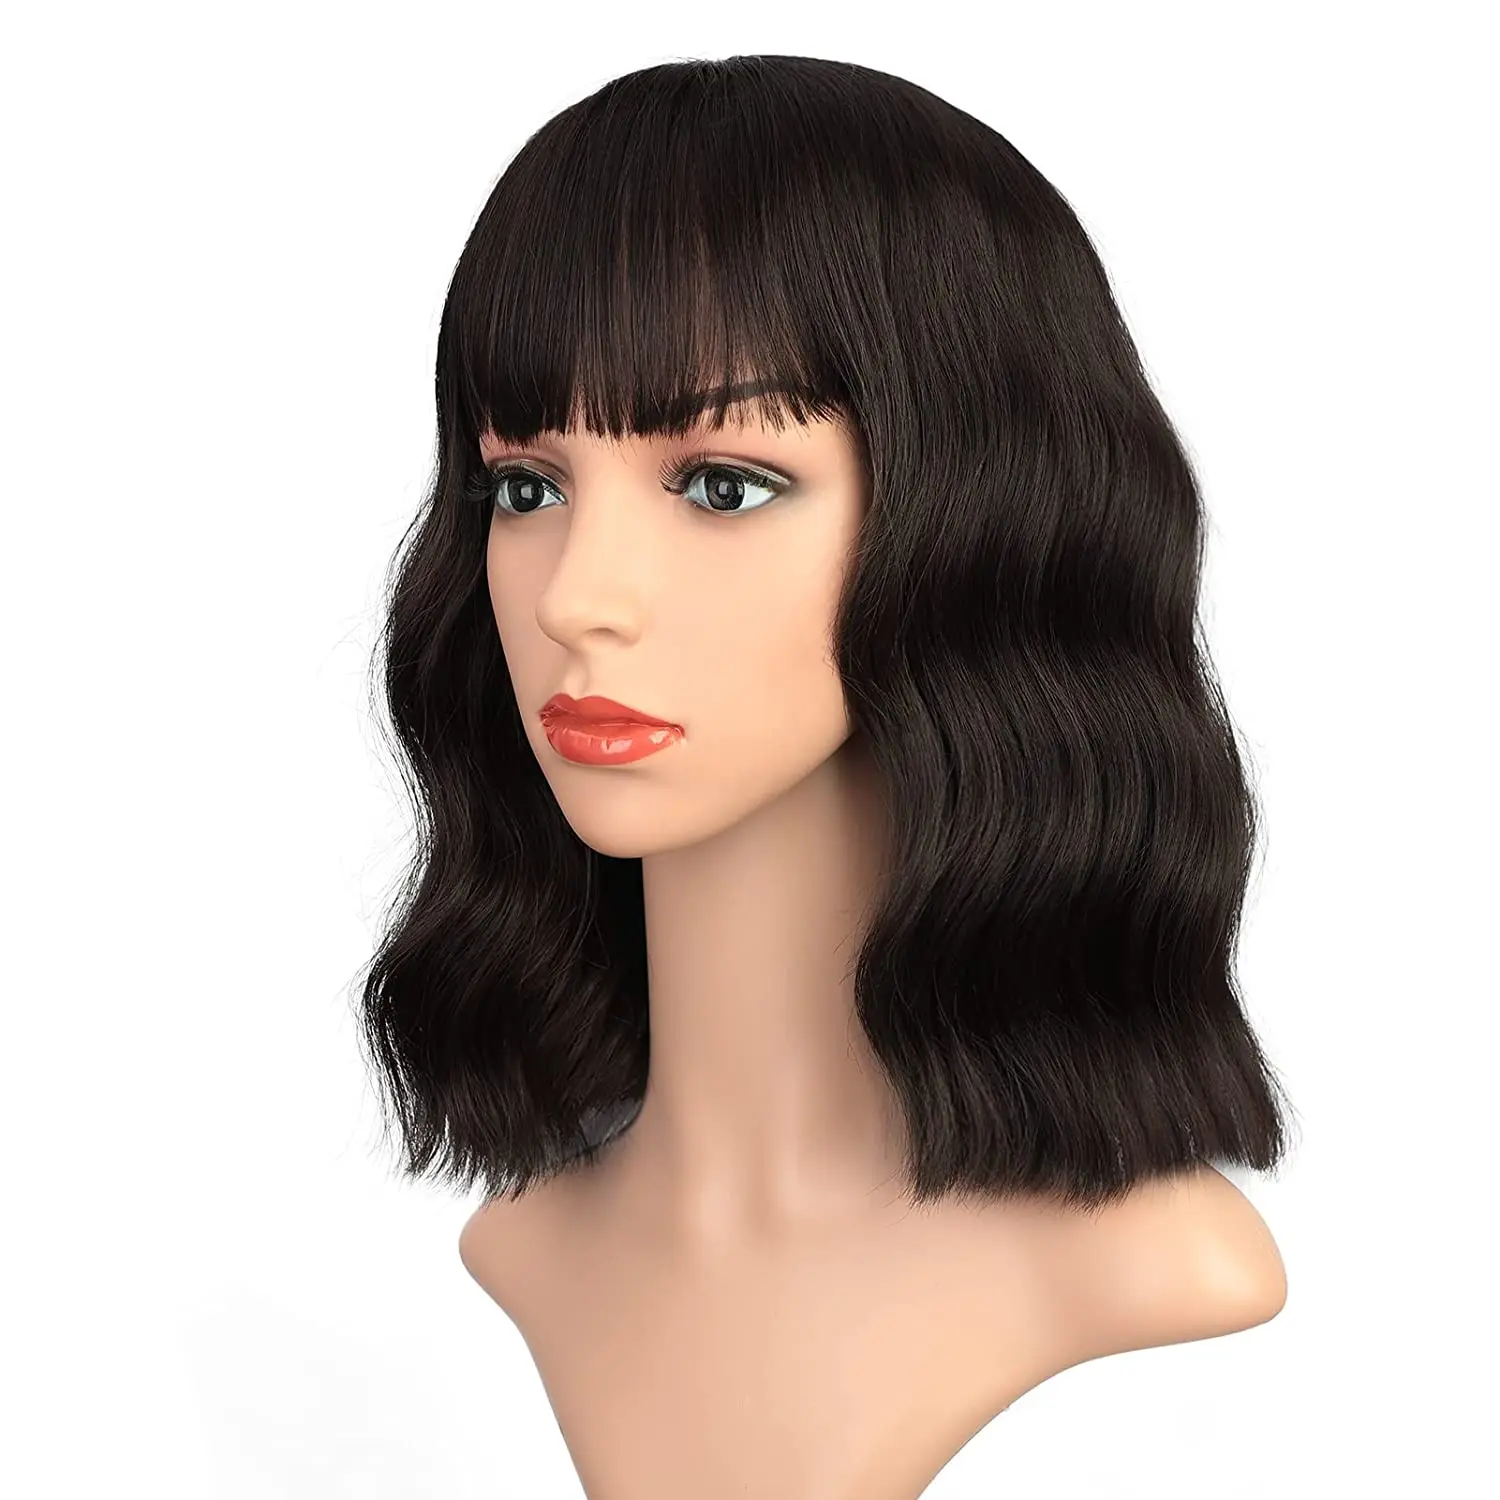 

14’Shoulder Length Cute Wig natural wavy short bob wigs with neat bangs for women synthetic heat resistant Wig for Party/Cosplay